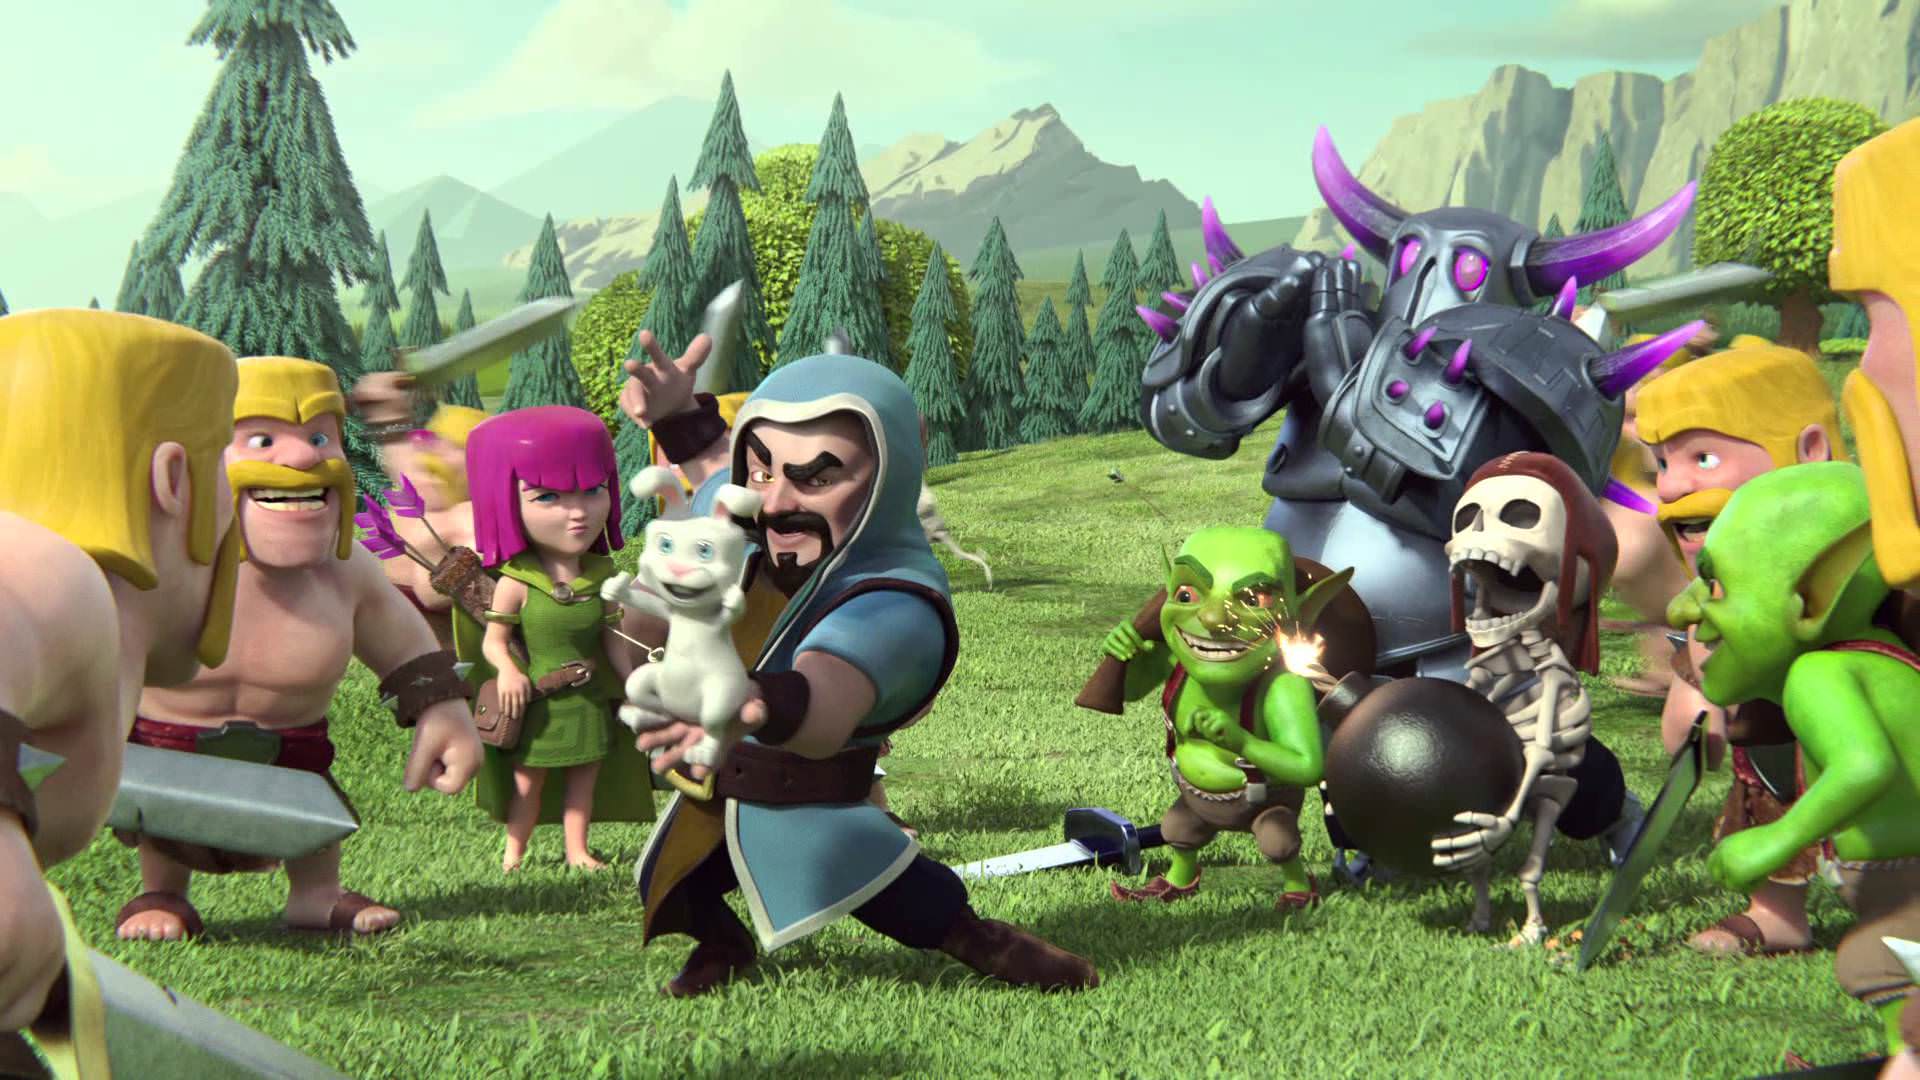 Clash of Clans Backgrounds Free download 